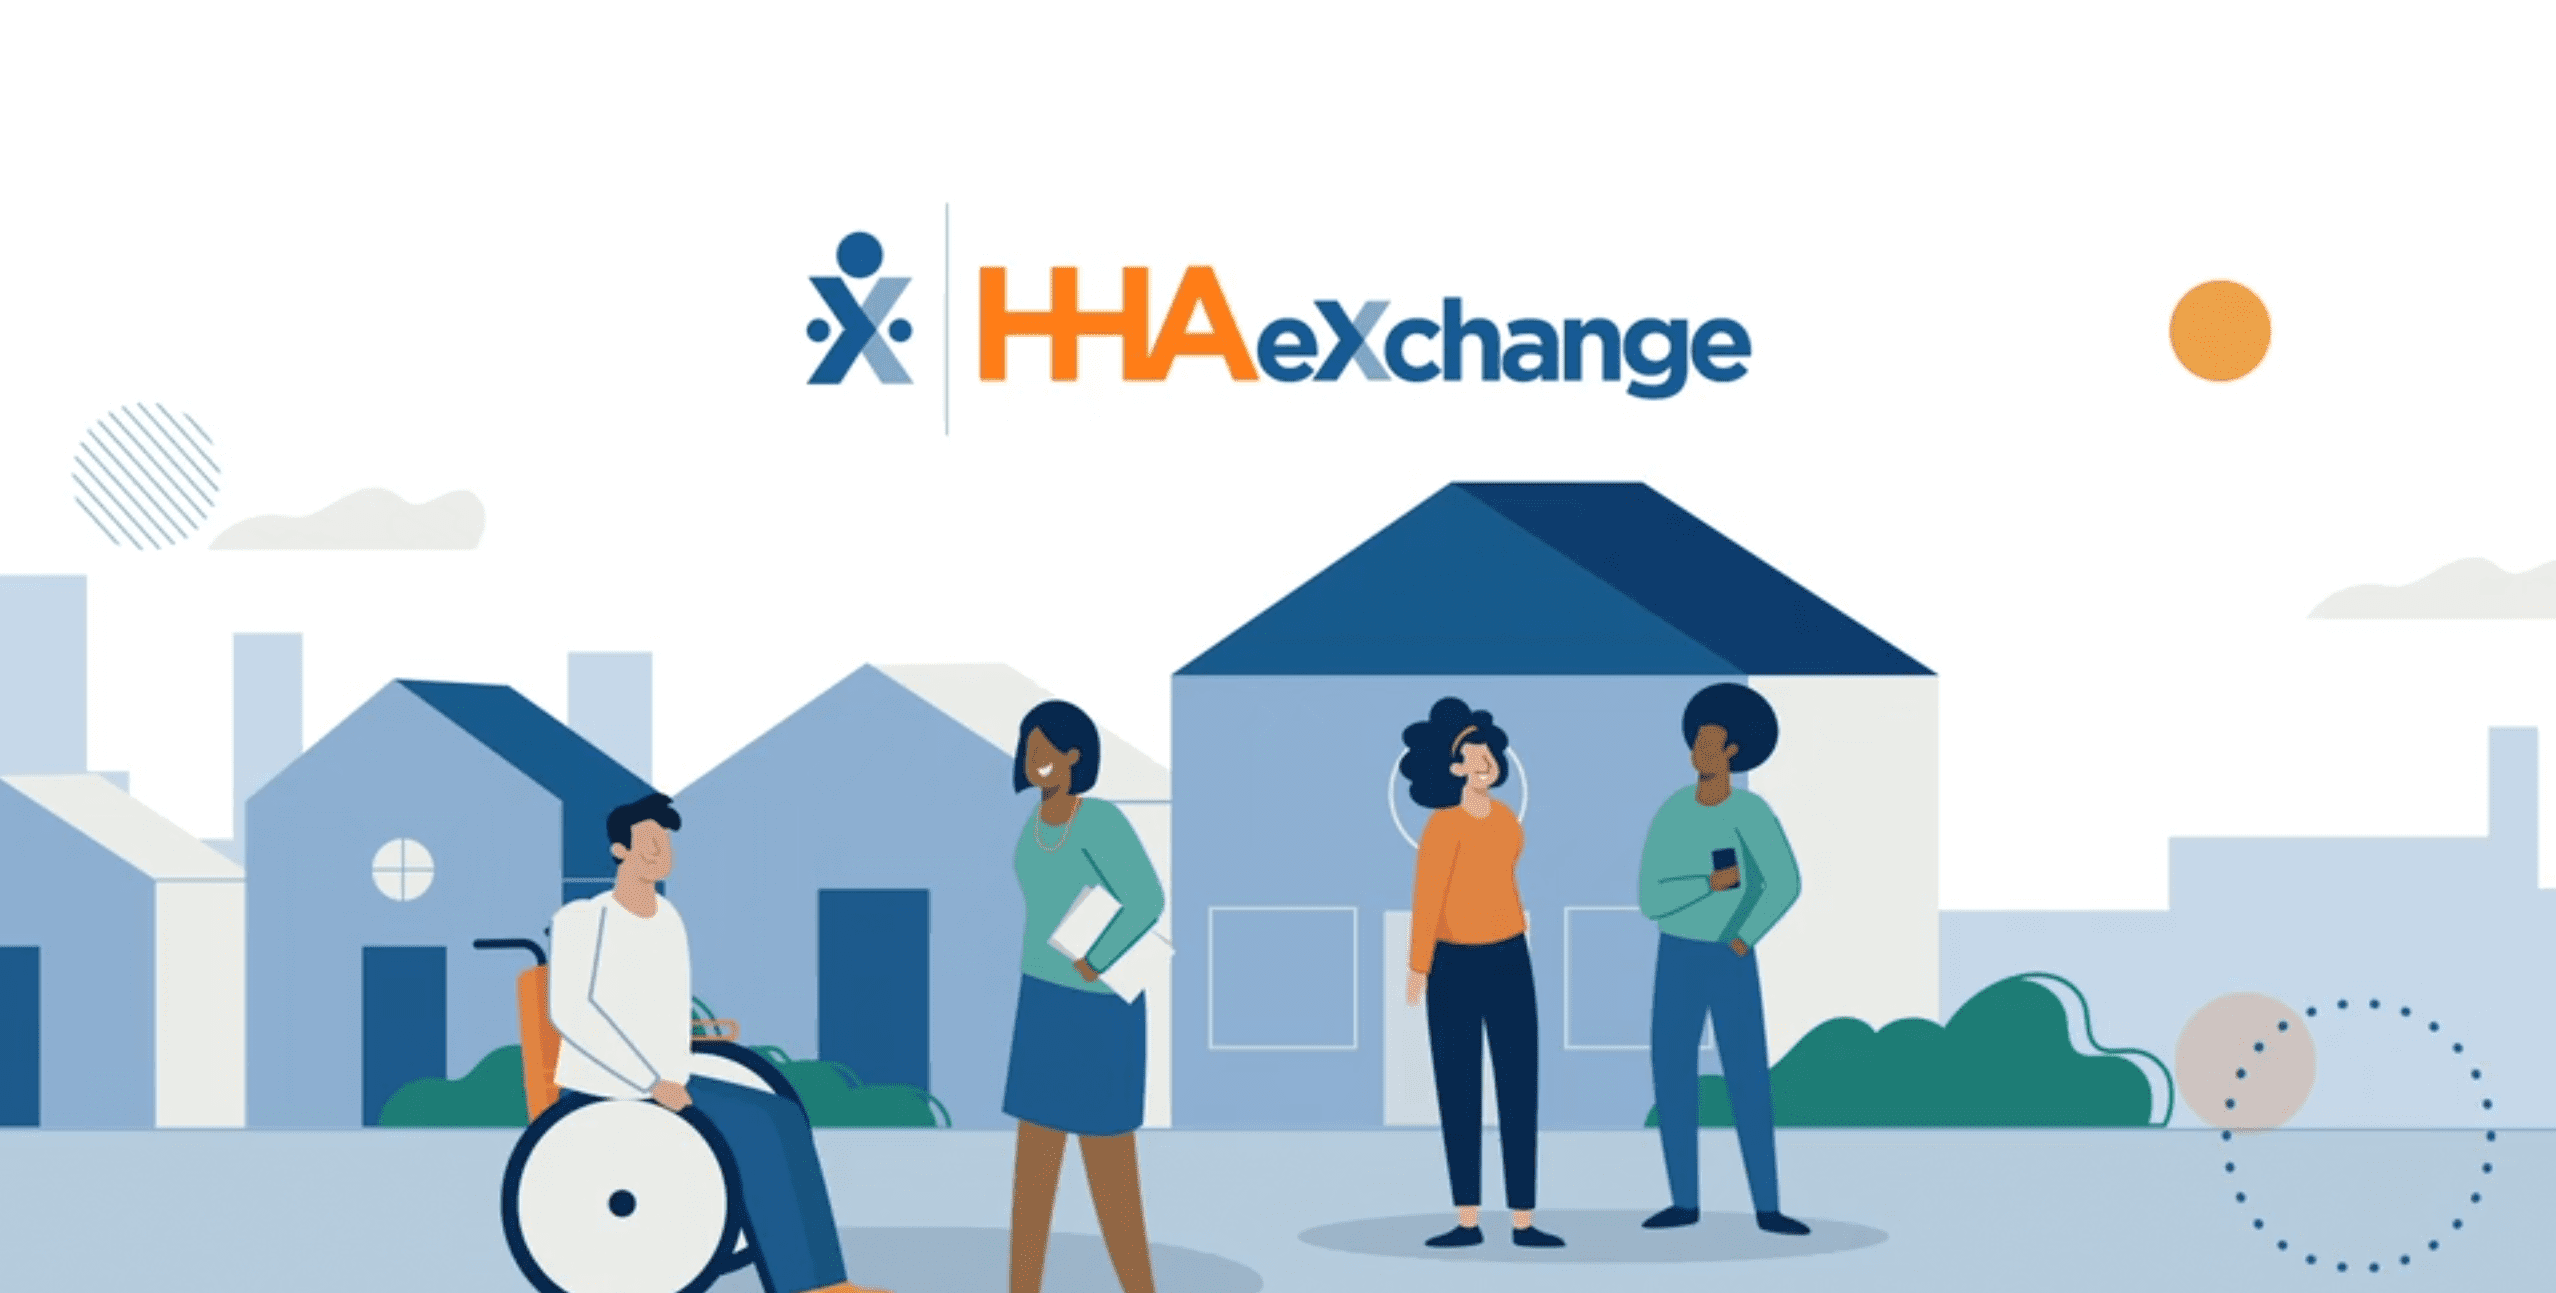 HHAeXchange Adds Six Solutions Providers to its Partner Connect Program